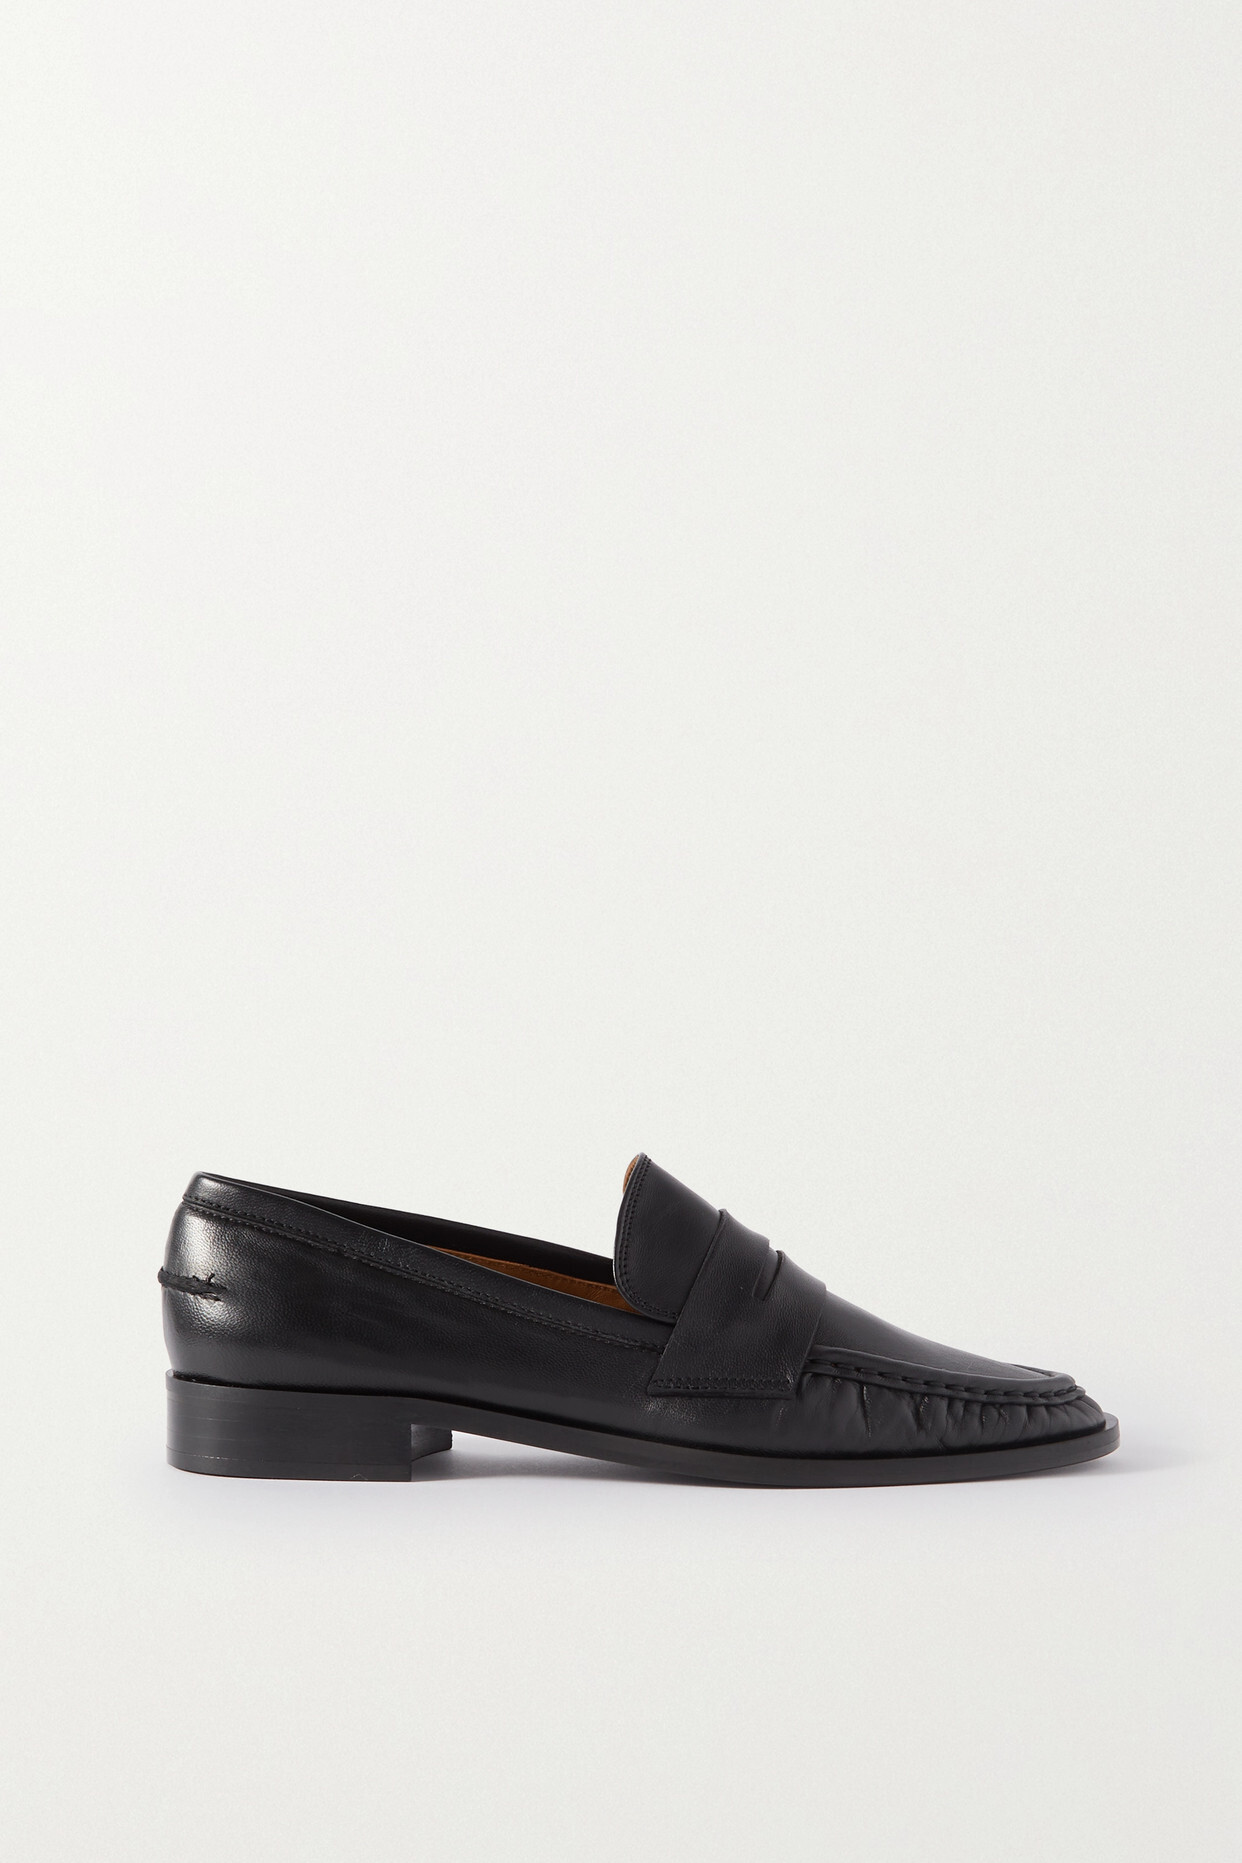 ATP Atelier - Airola Leather Loafers - Black